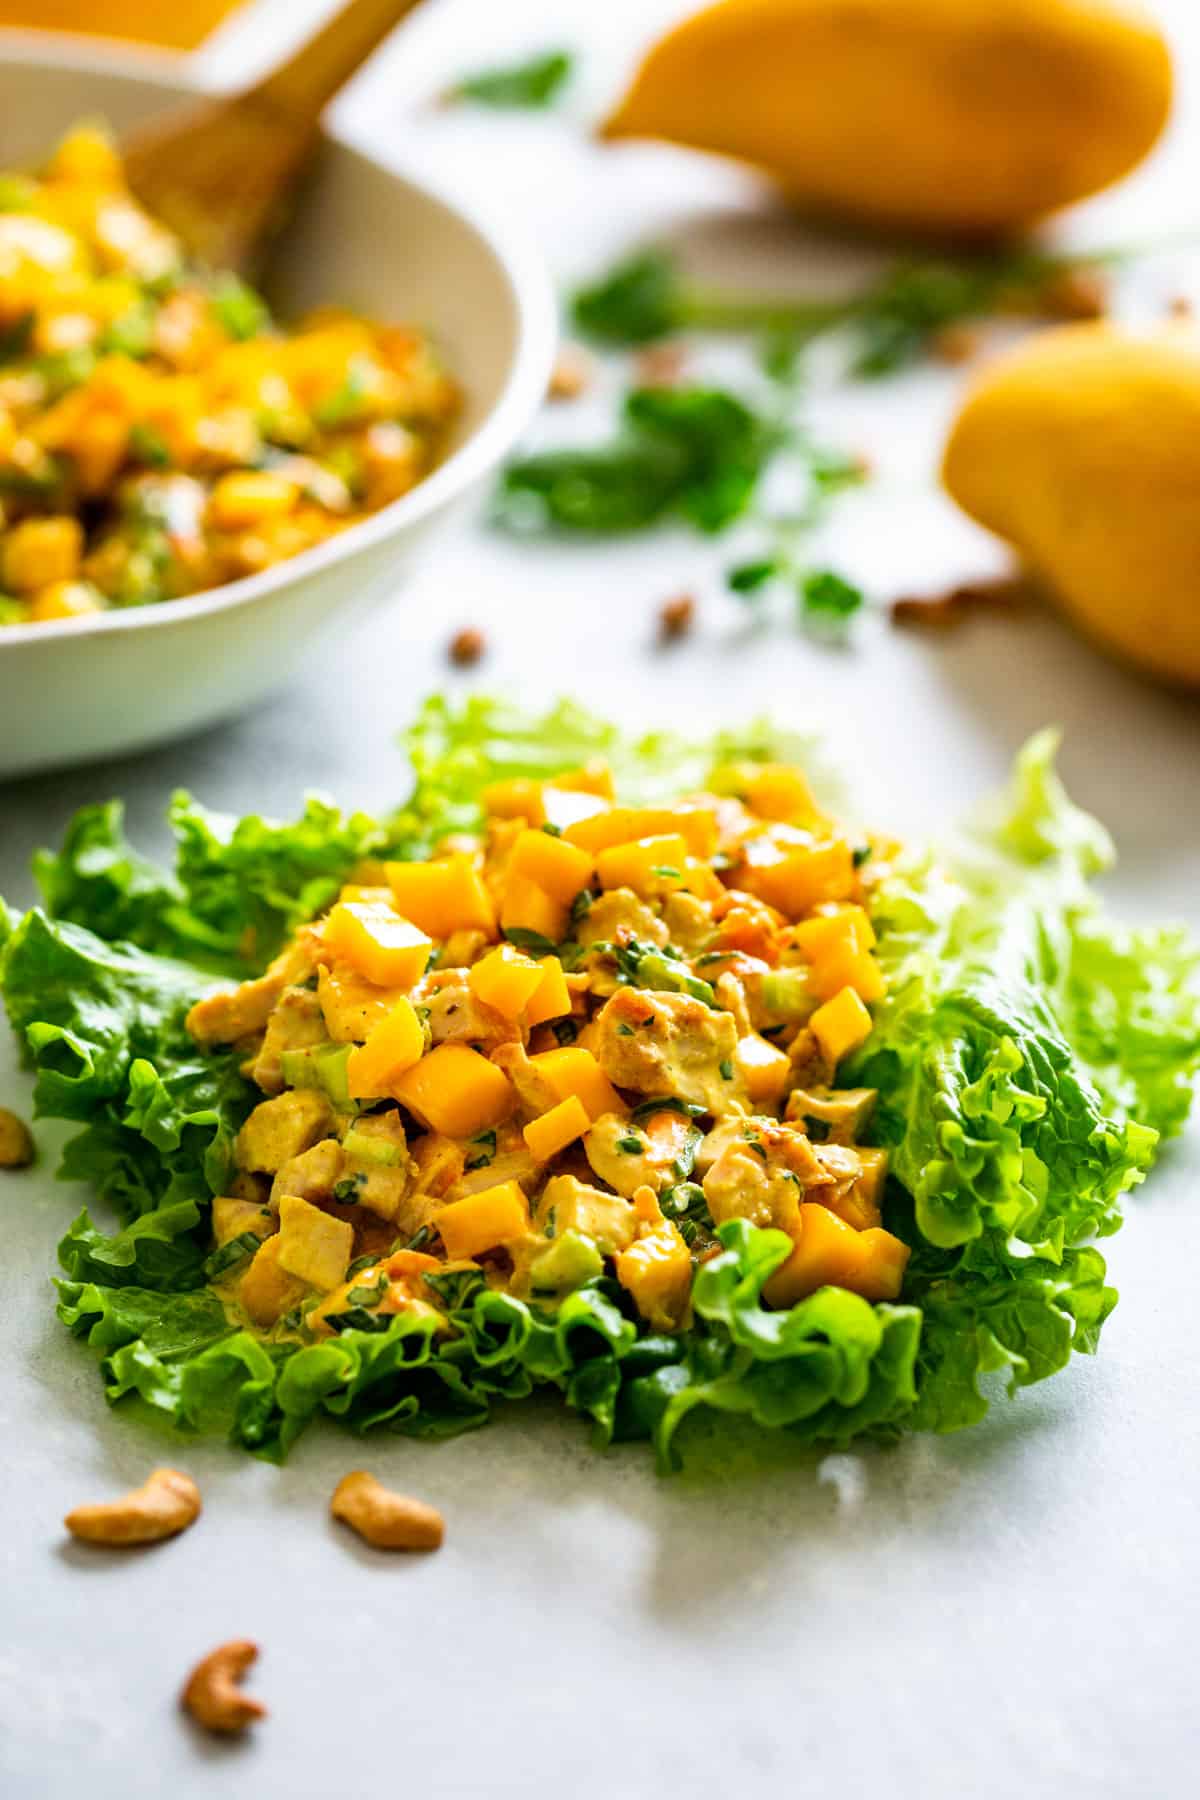 Curried chicken salad piled onto a large leaf of lettuce topped with diced mango and a bowl of chicken salad in the background.